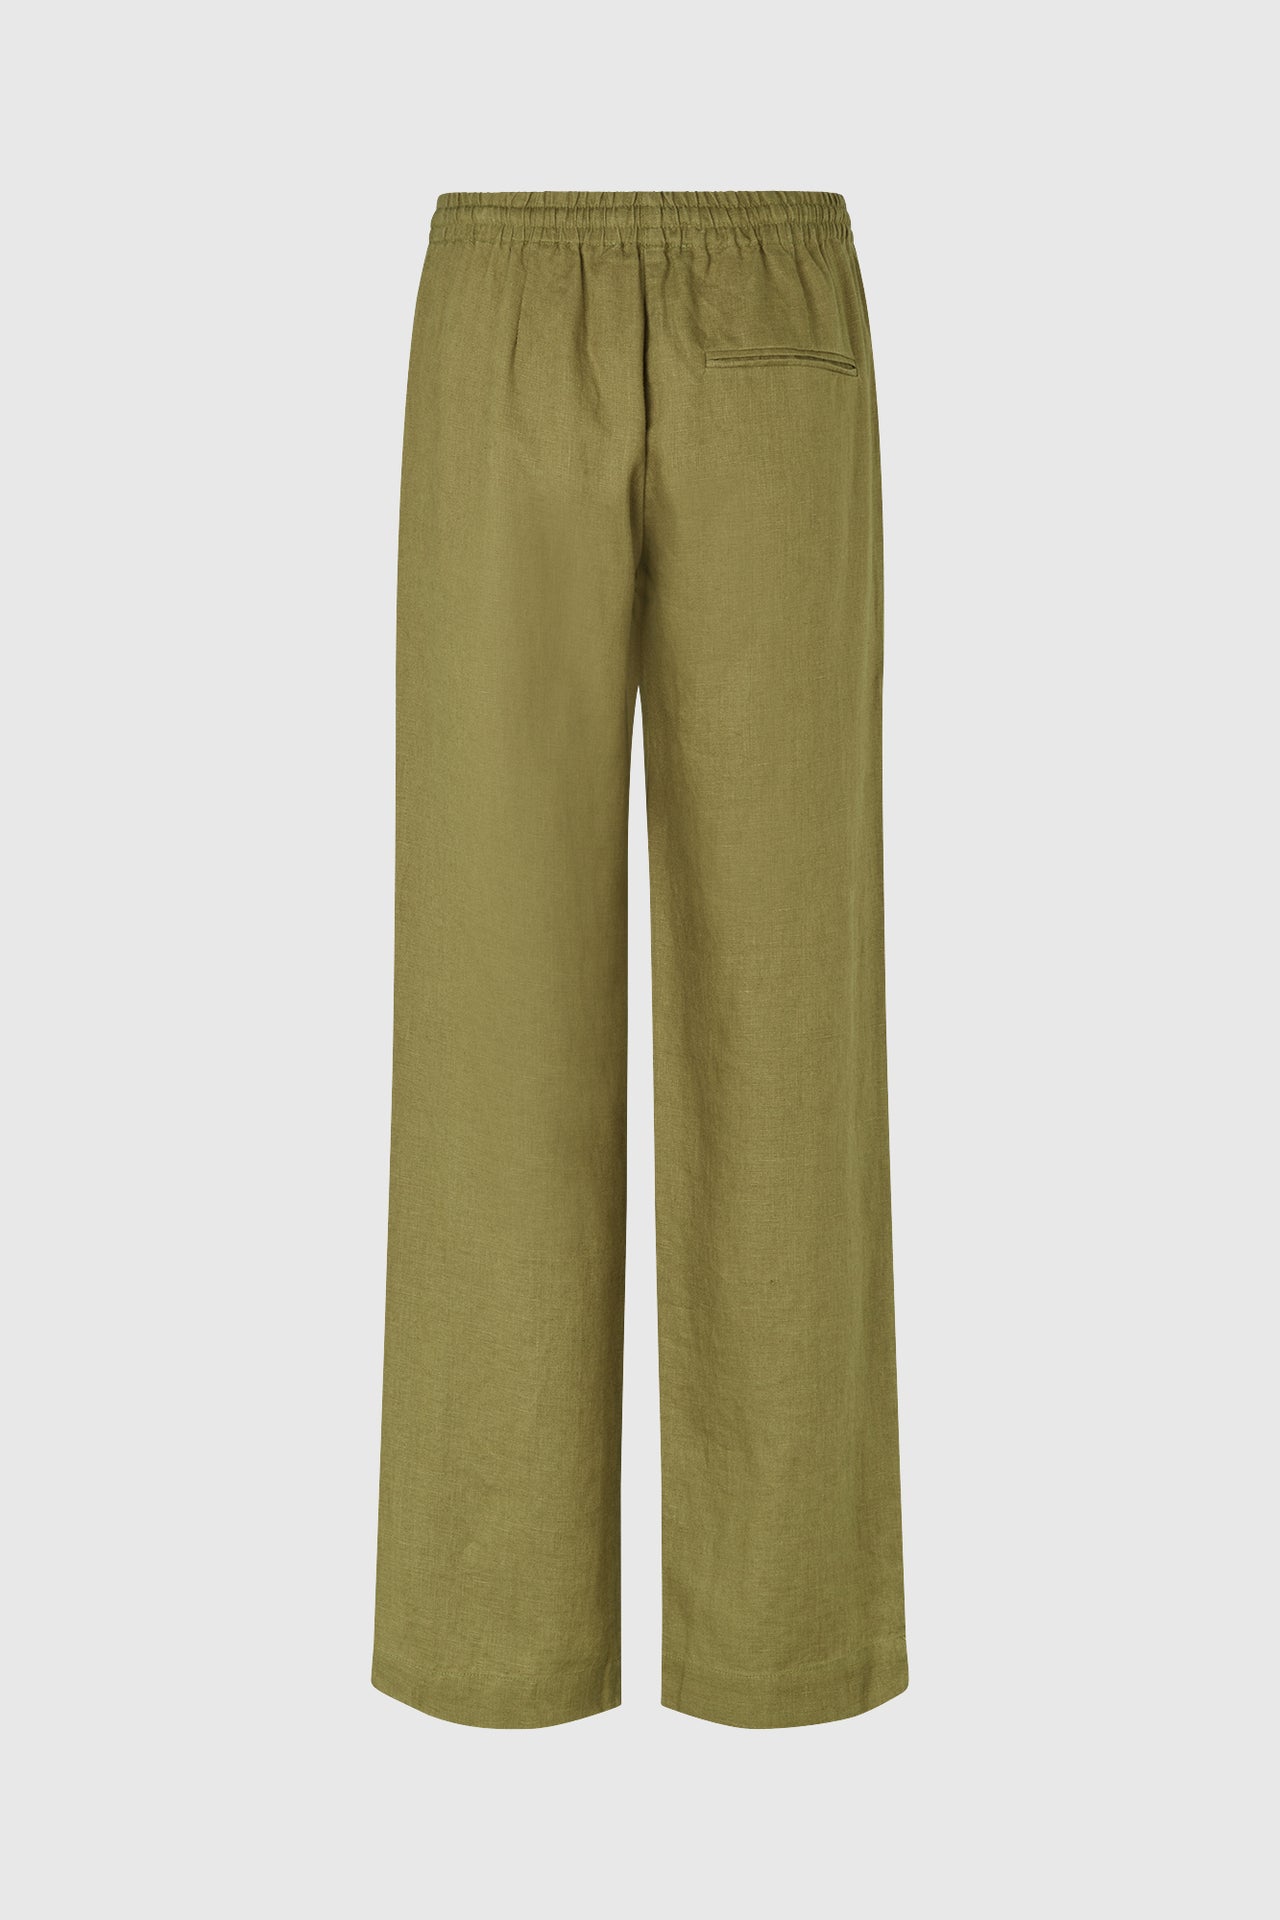 HOYS TROUSERS OLIVE